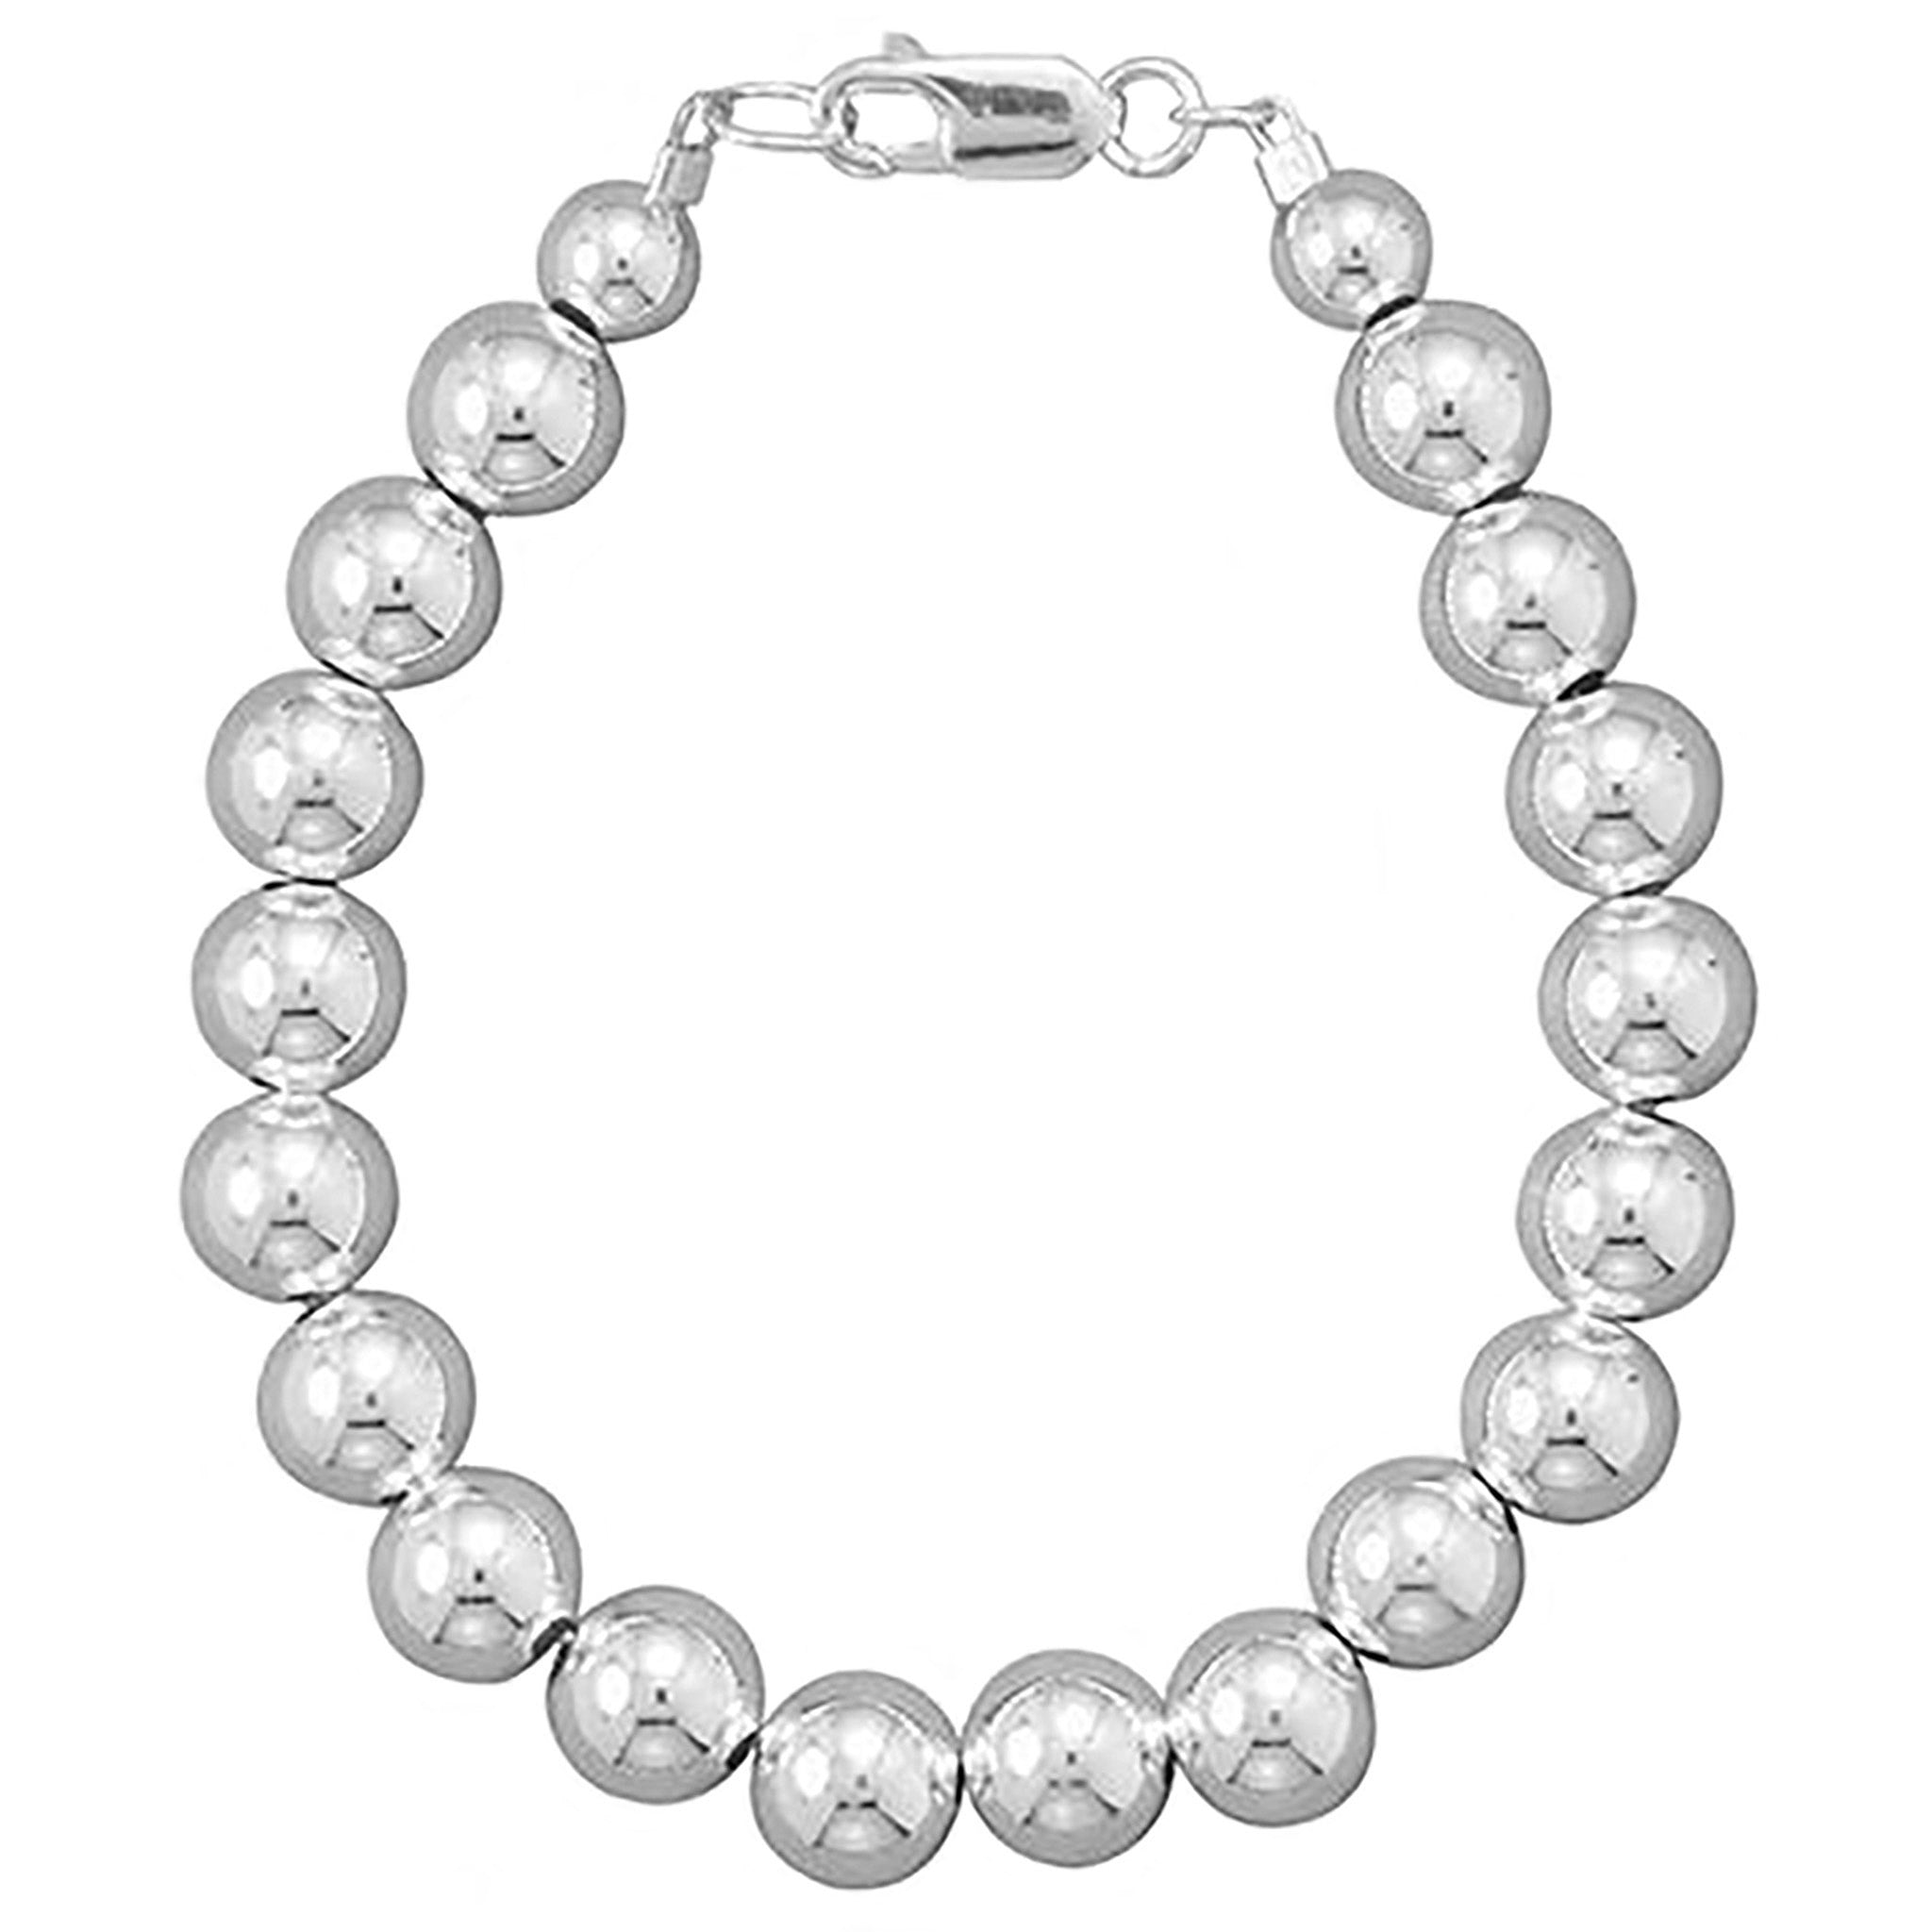 8mm Silver Bead Strand Necklace